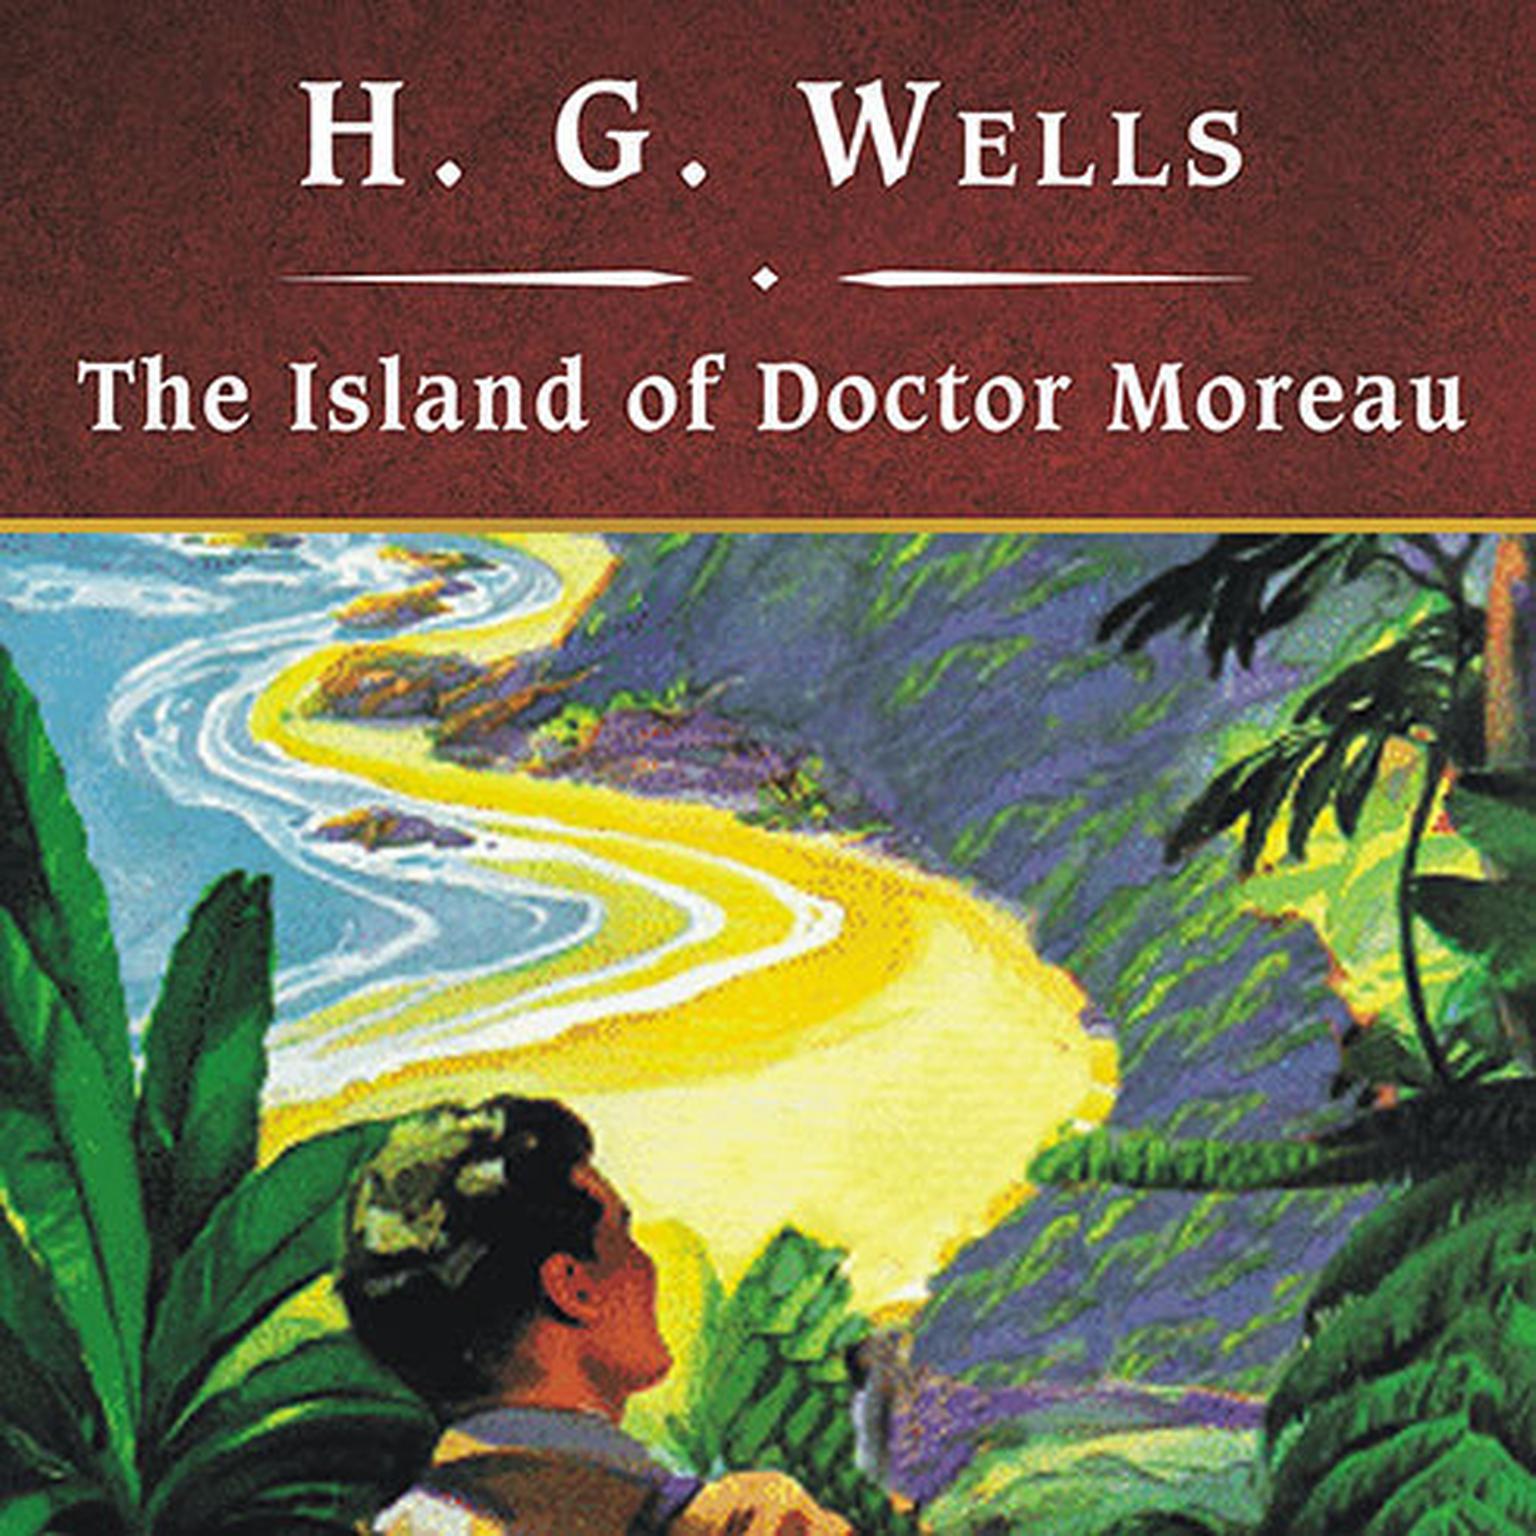 The Island of Doctor Moreau, with eBook Audiobook, by H. G. Wells